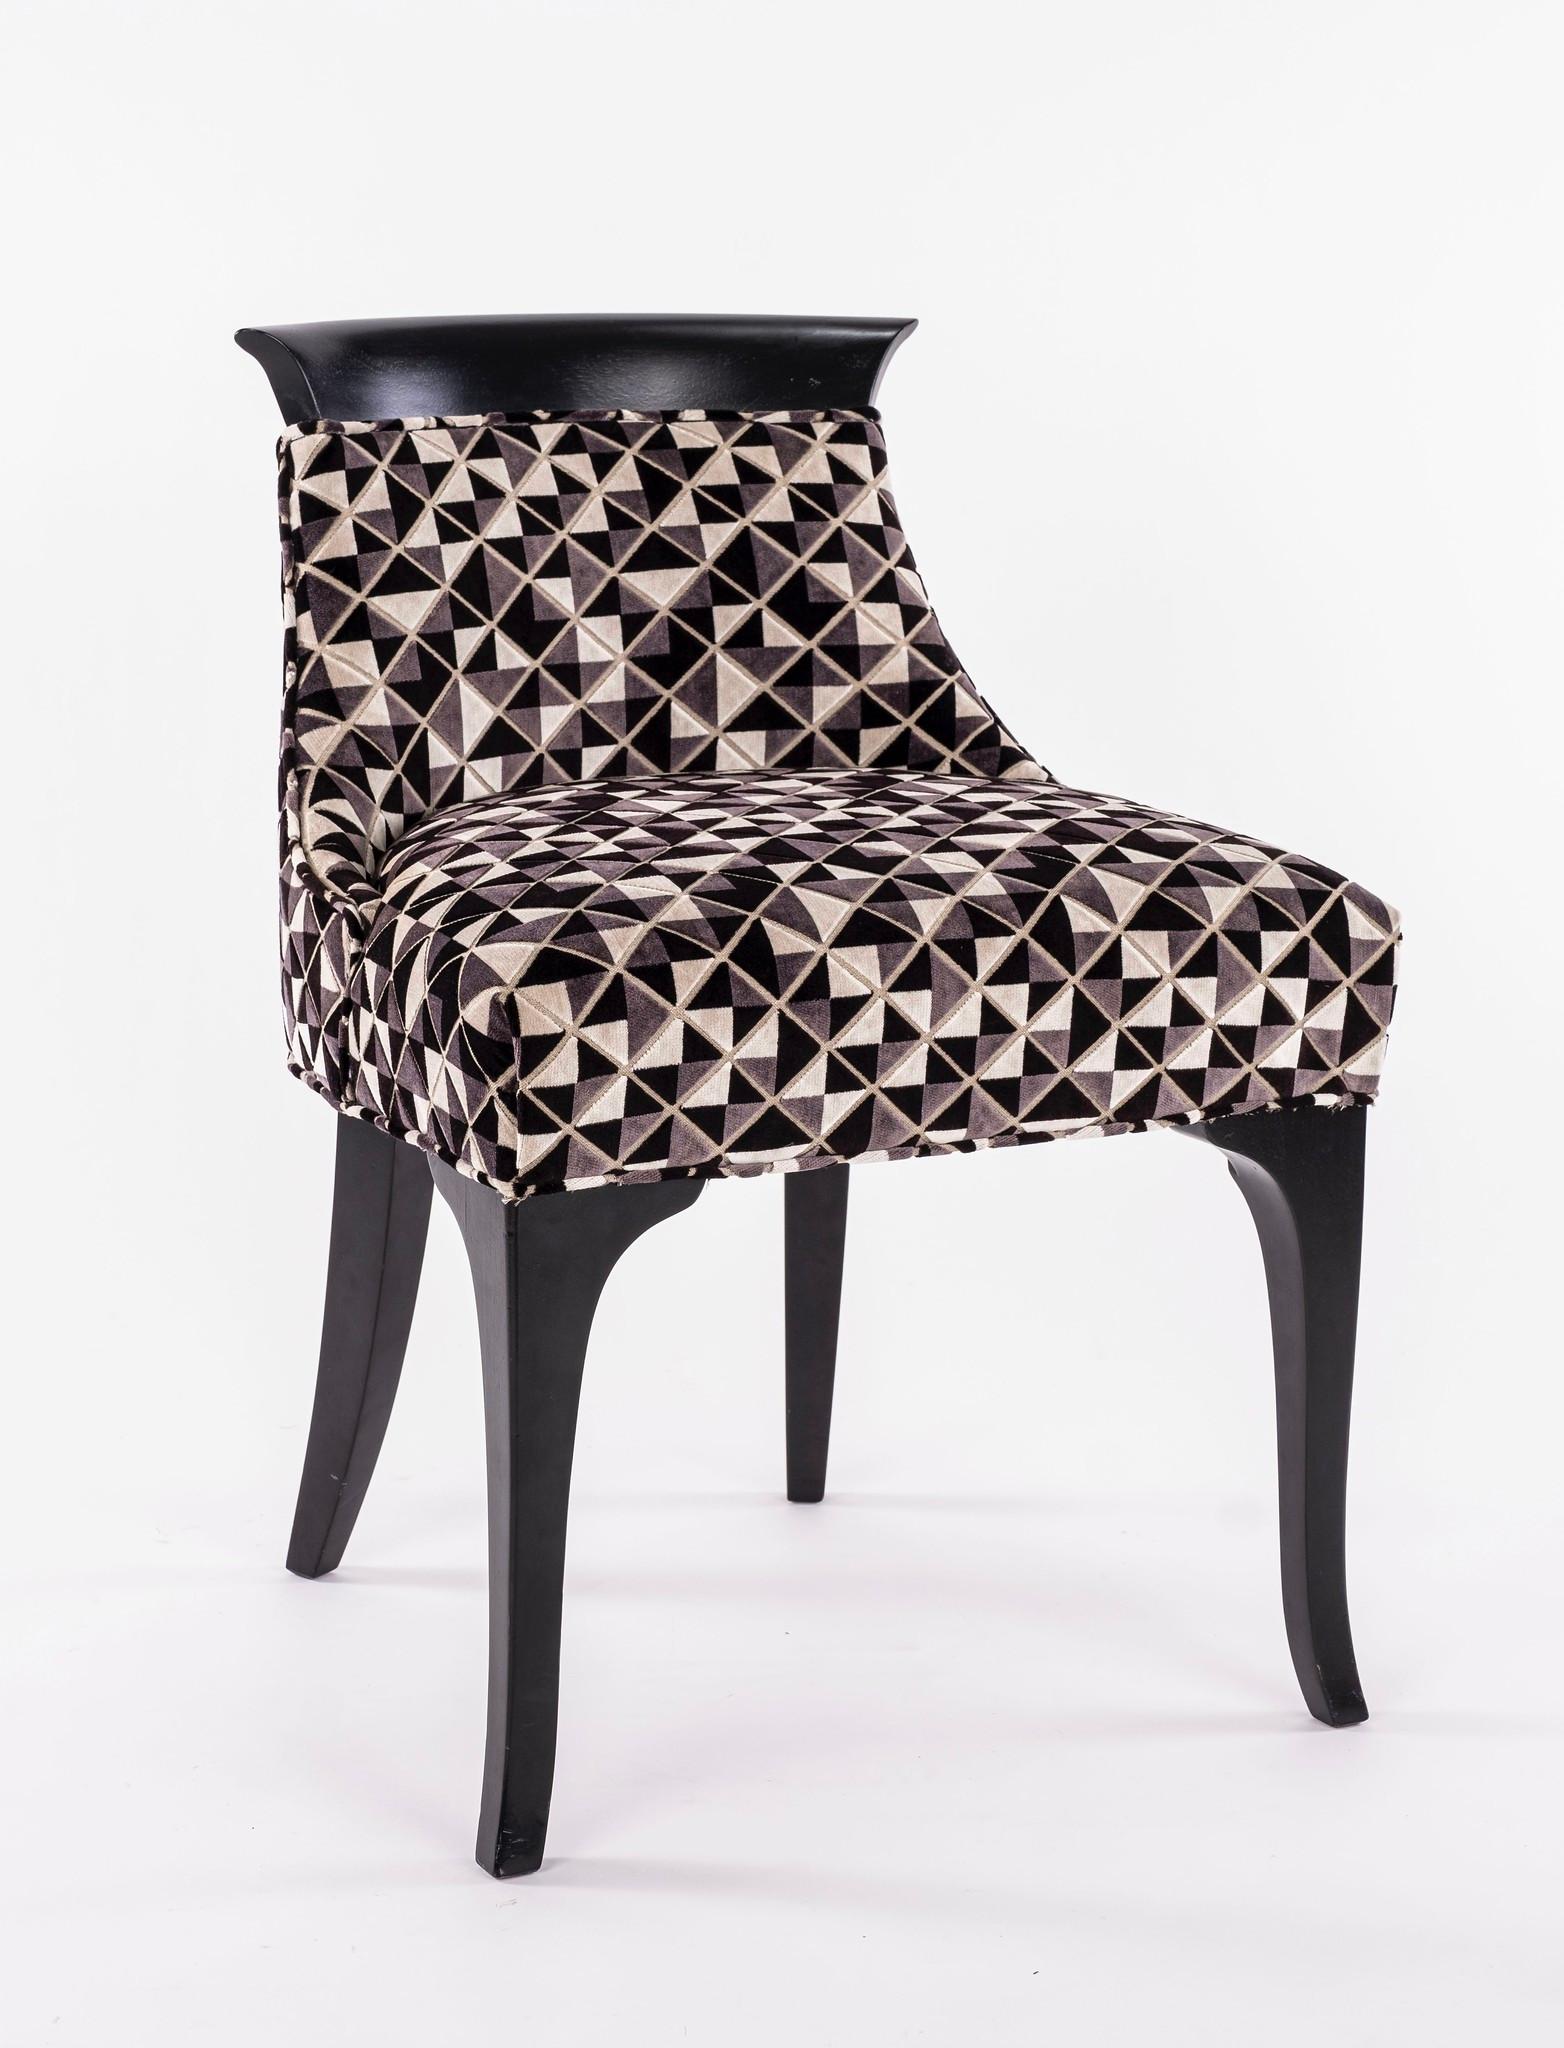 Vintage ebonized slipper chair newly upholstered in a graphic black, white and gray playful geometric velvet.